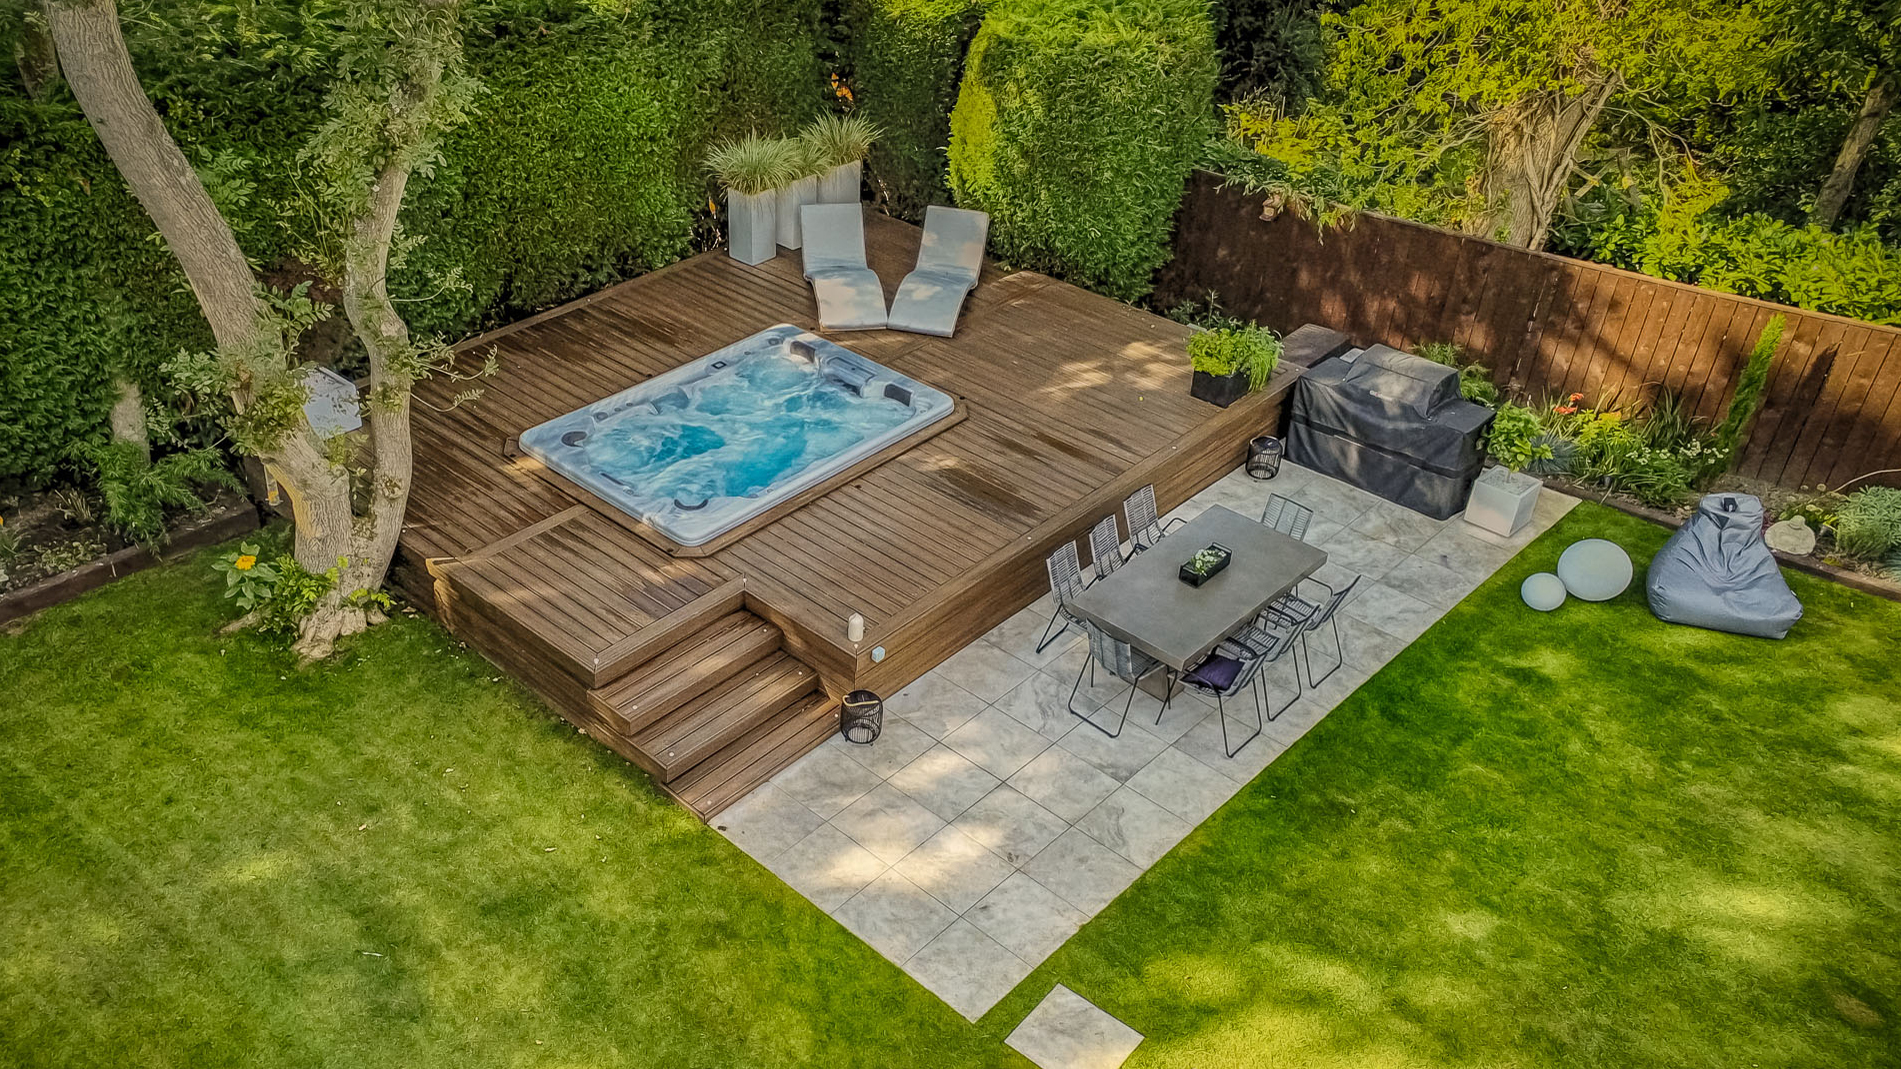 Arguments For Getting Rid Of where to put a hot tub in backyard